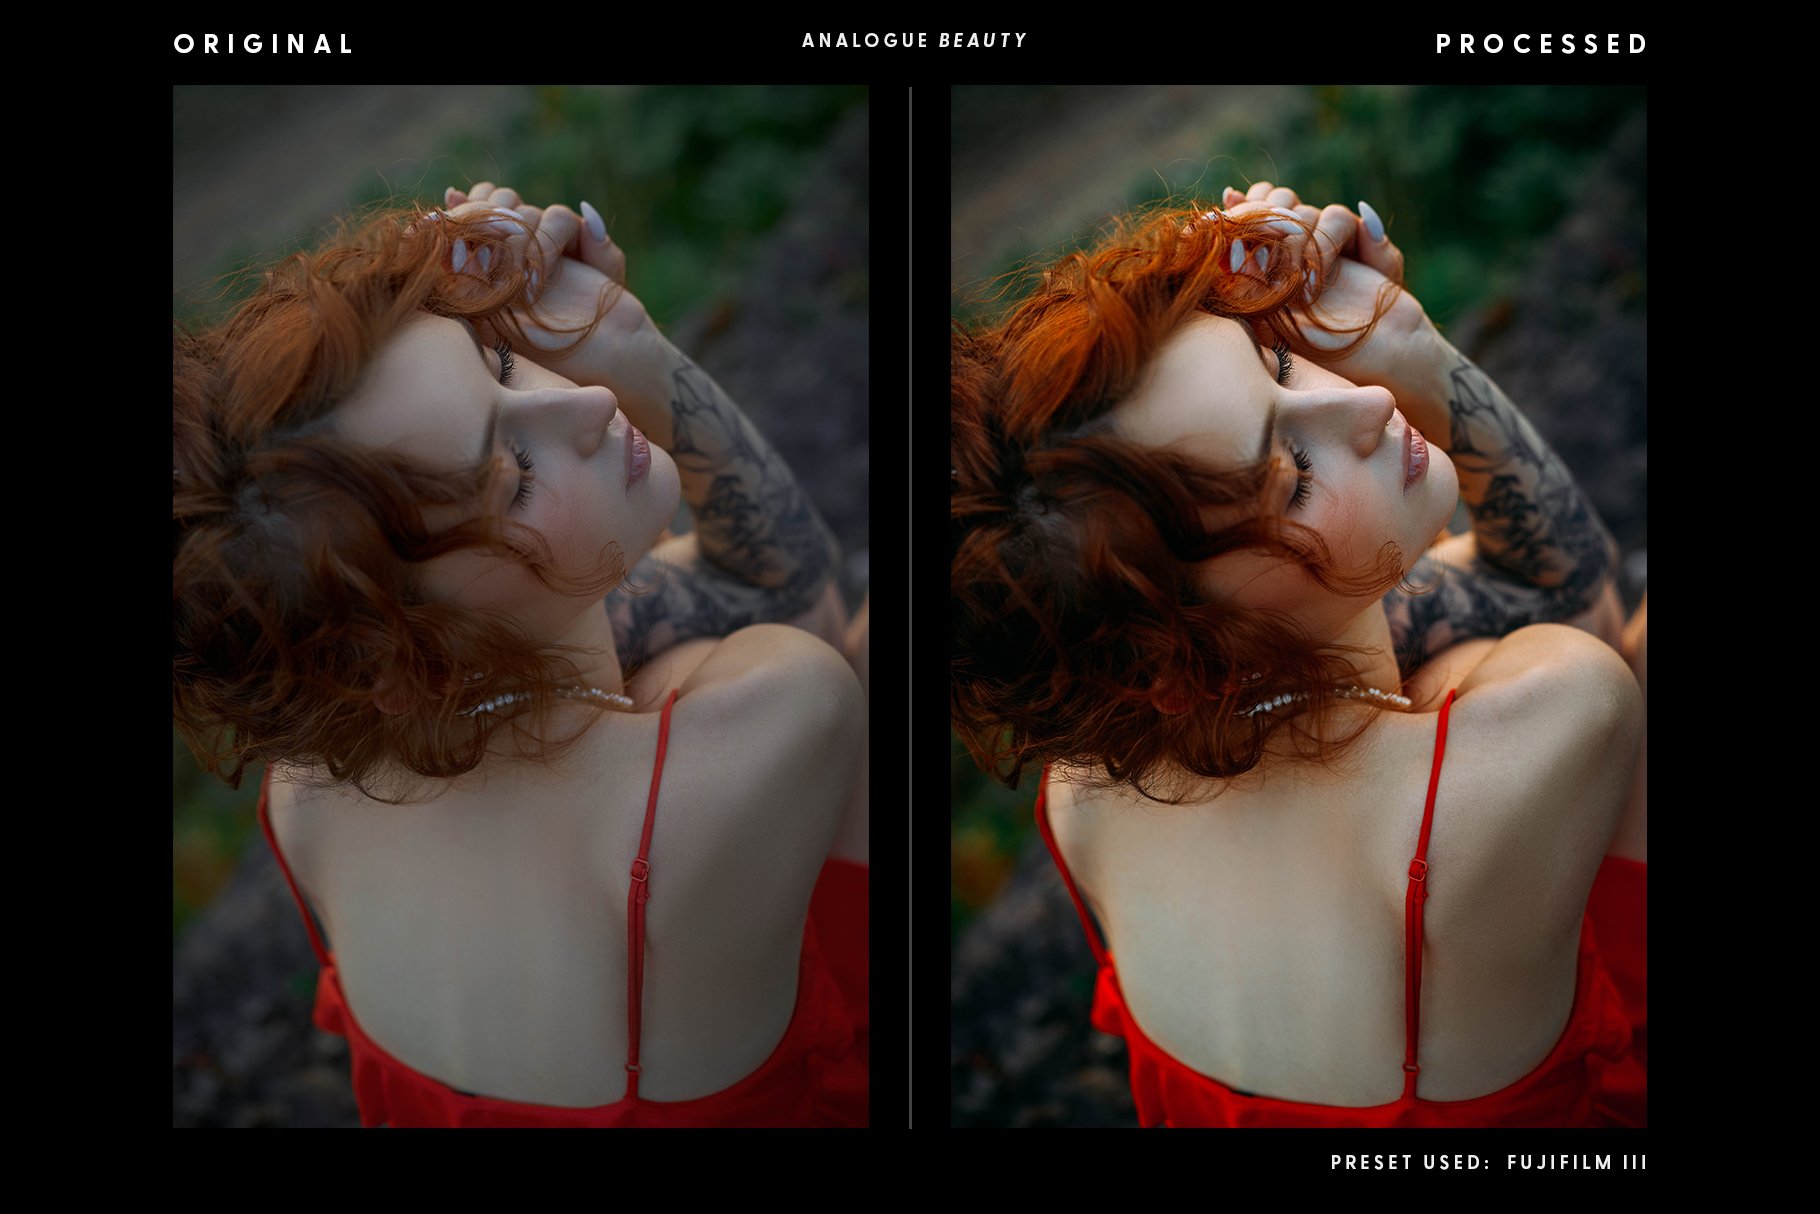 Analogue Beauty - Actions & Presetspreview image.